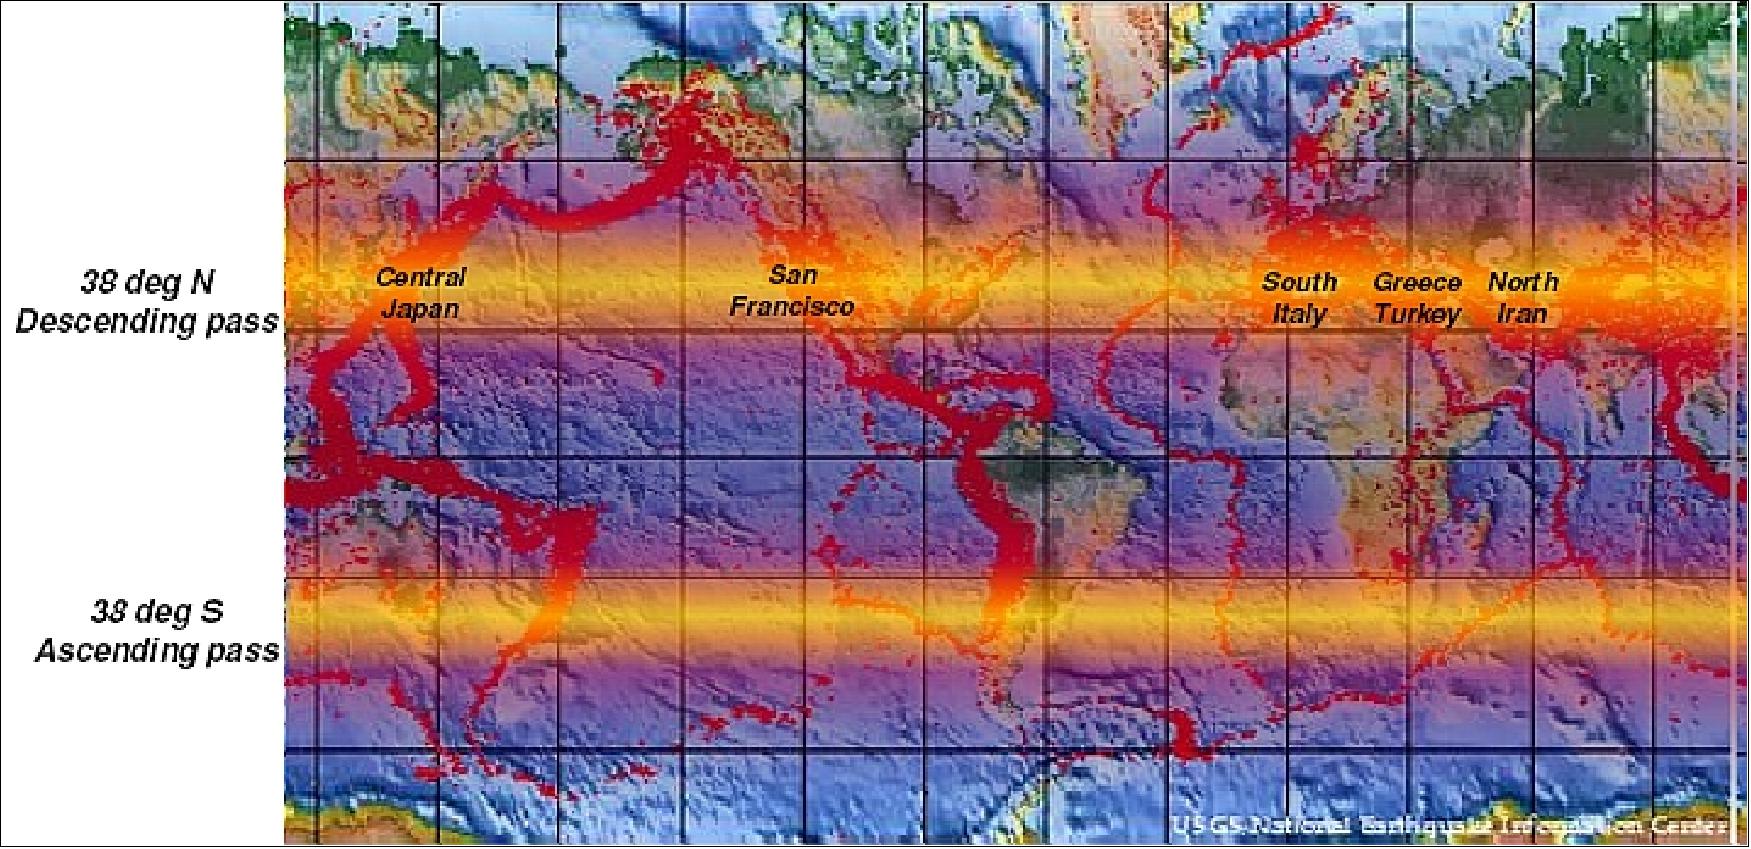 Figure 25: Illustration of DinSAR latitude coverage in the extended mission phase in 2011 and beyond (image credit: ESA) 42)